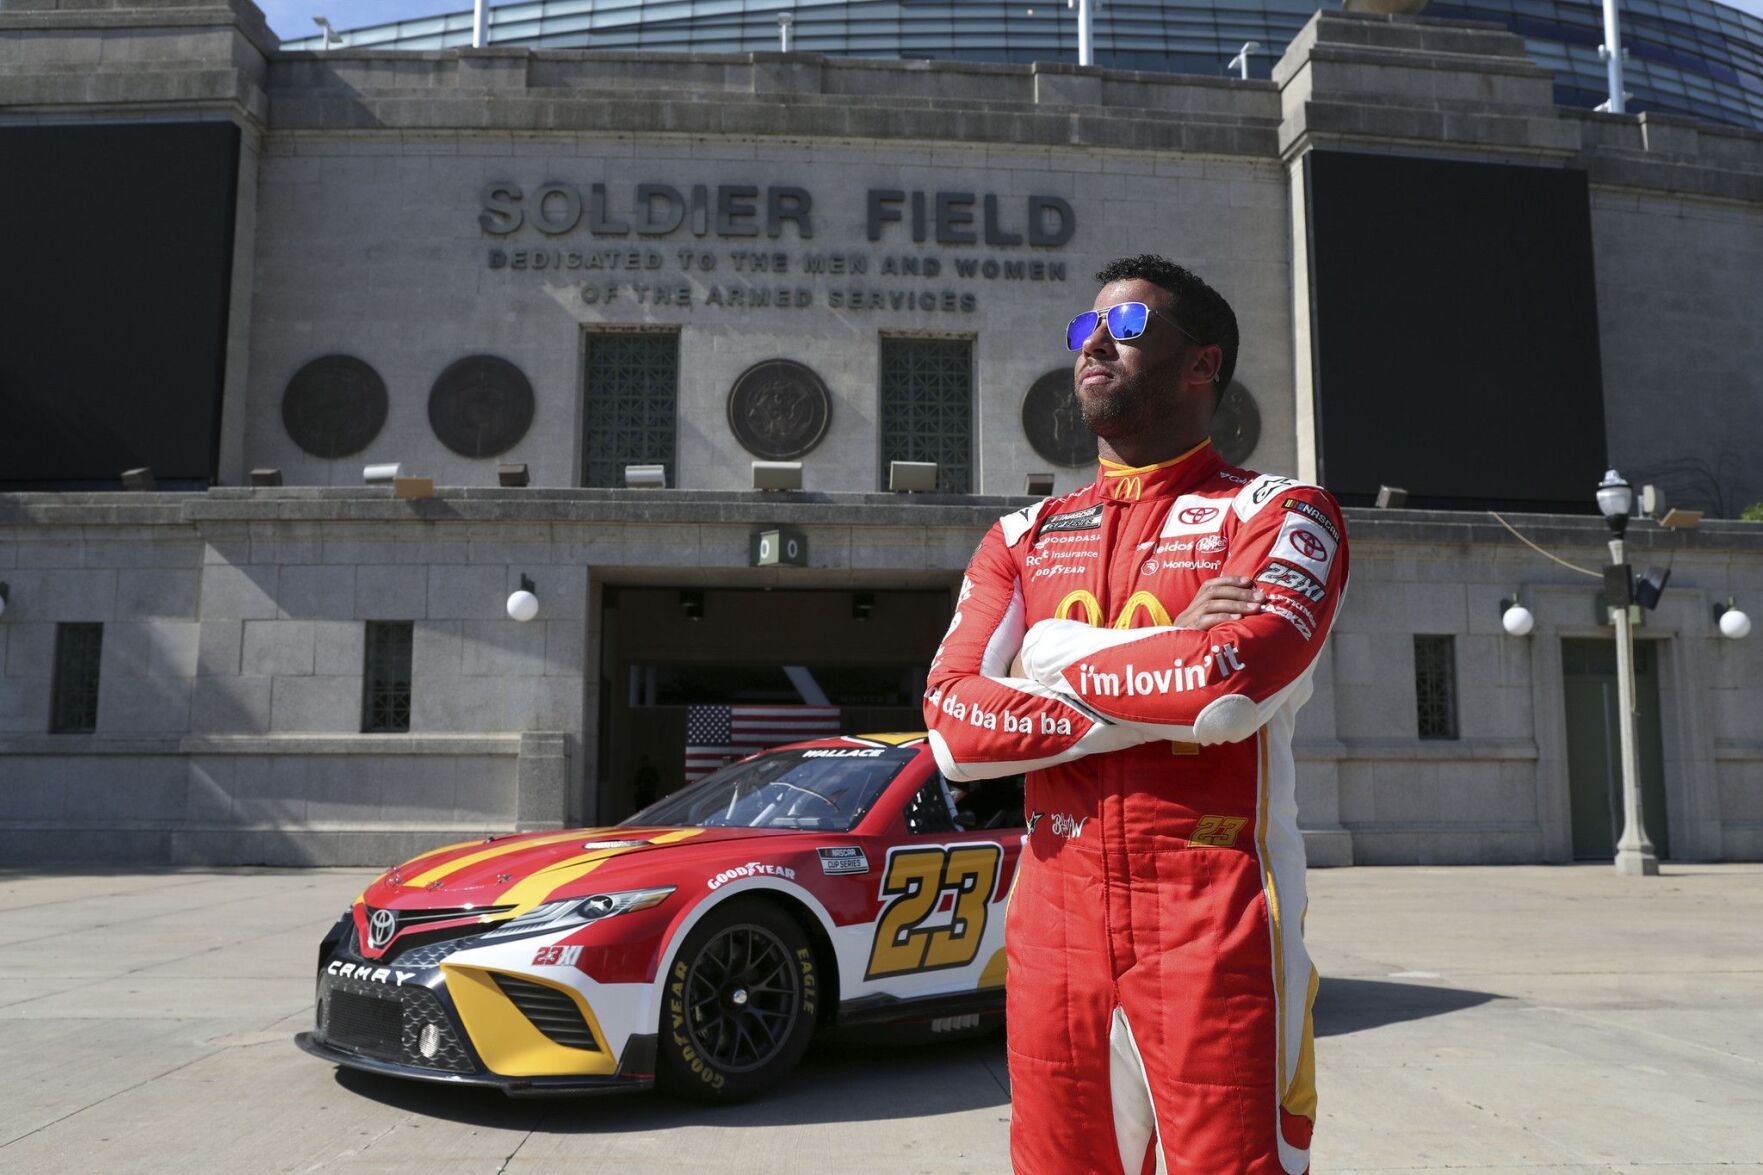 NASCAR street race touts economic benefits for Chicago, but pushback grows over traffic, safety